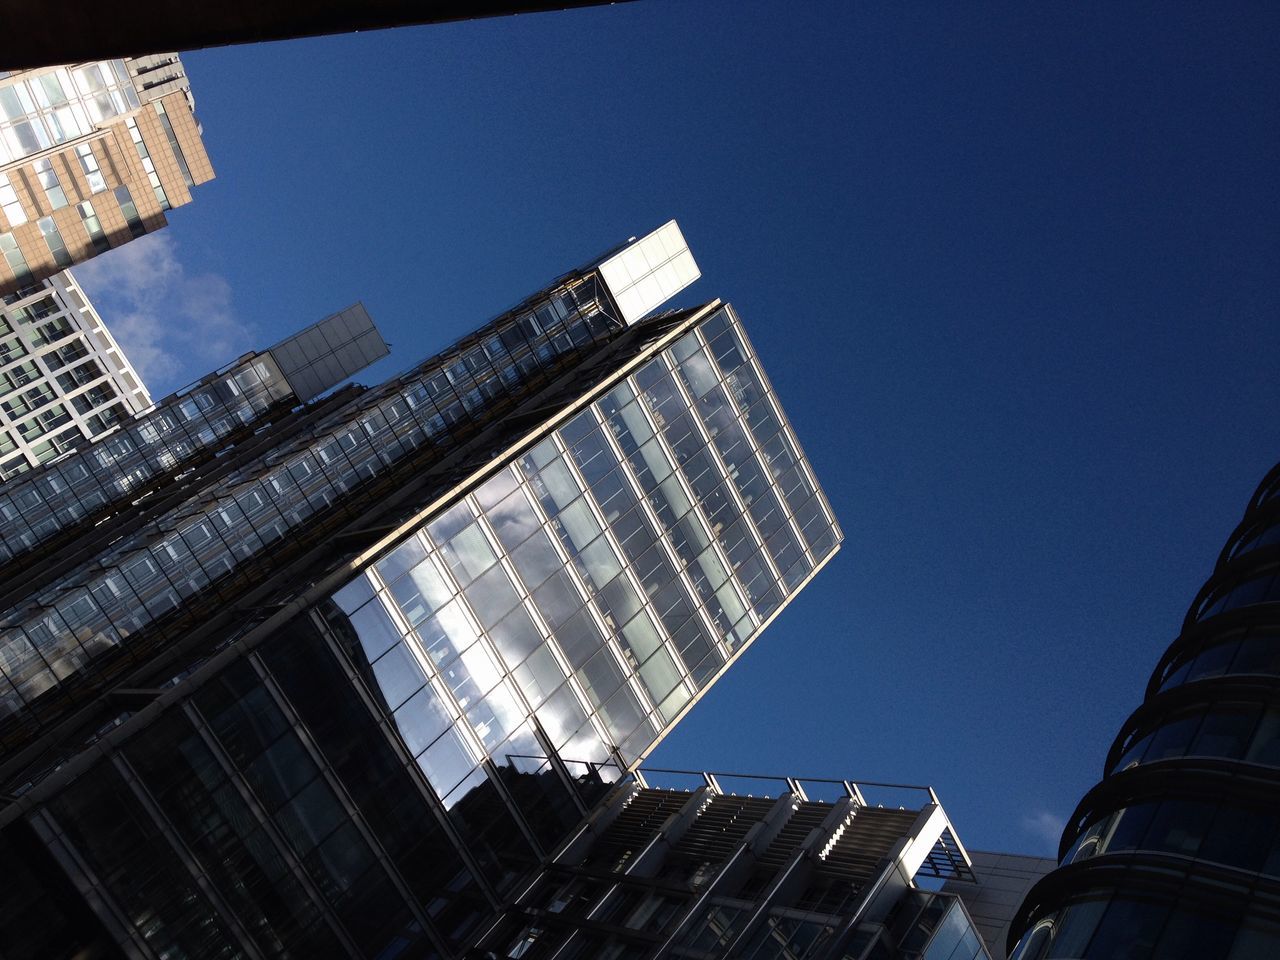 building exterior, architecture, built structure, low angle view, skyscraper, modern, city, office building, tall - high, tower, clear sky, building, blue, sky, glass - material, tall, reflection, financial district, day, outdoors